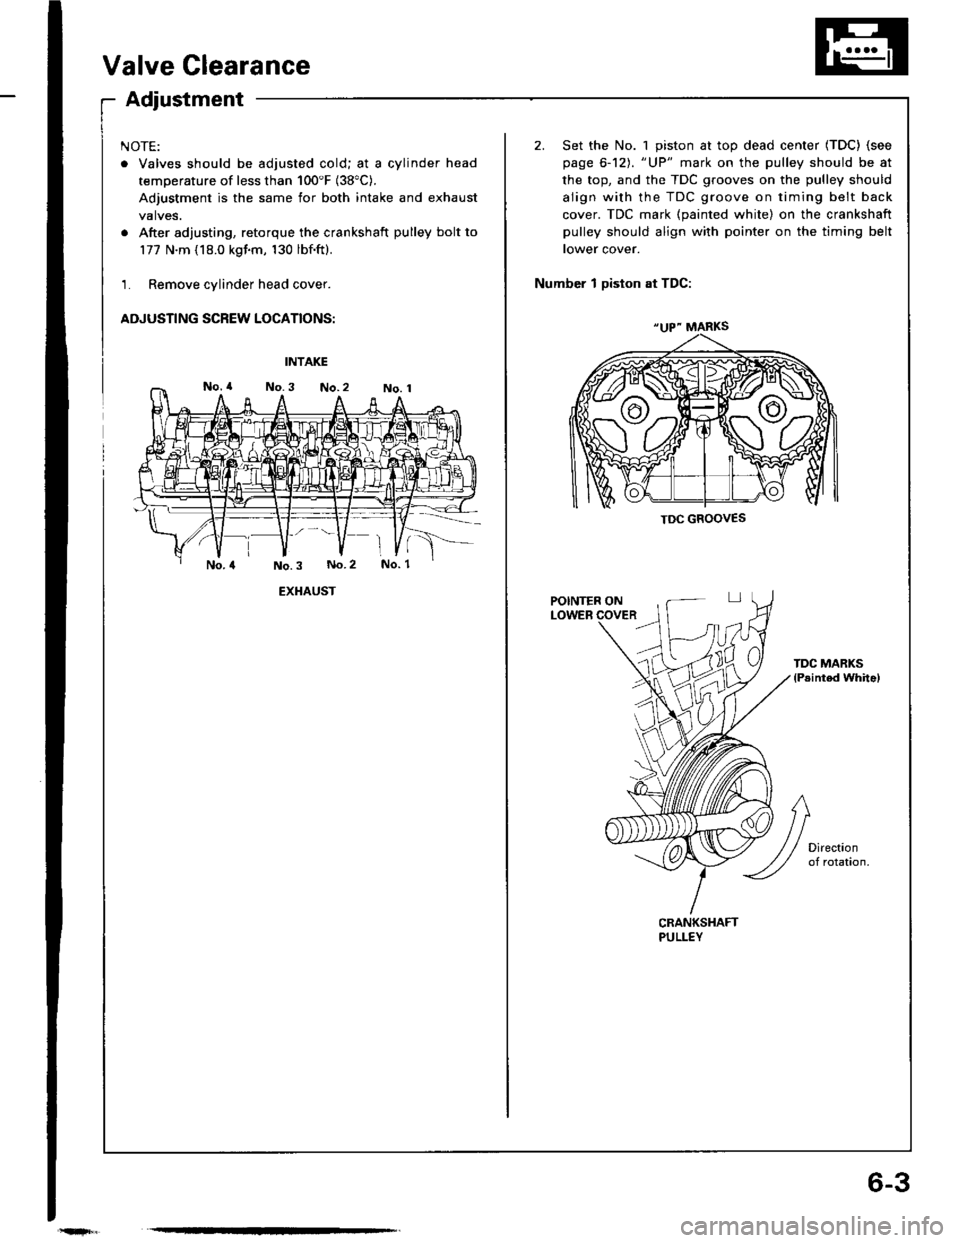 HONDA INTEGRA 1994 4.G Workshop Manual 6-3
Valve Clearance
Adjustment
NOTE:
. Valves should be adjusted cold; at a cylinder head
temperature of less than 100F (38"C).
Adjustment is the same for both intake and exhaust
valves.
. After adju